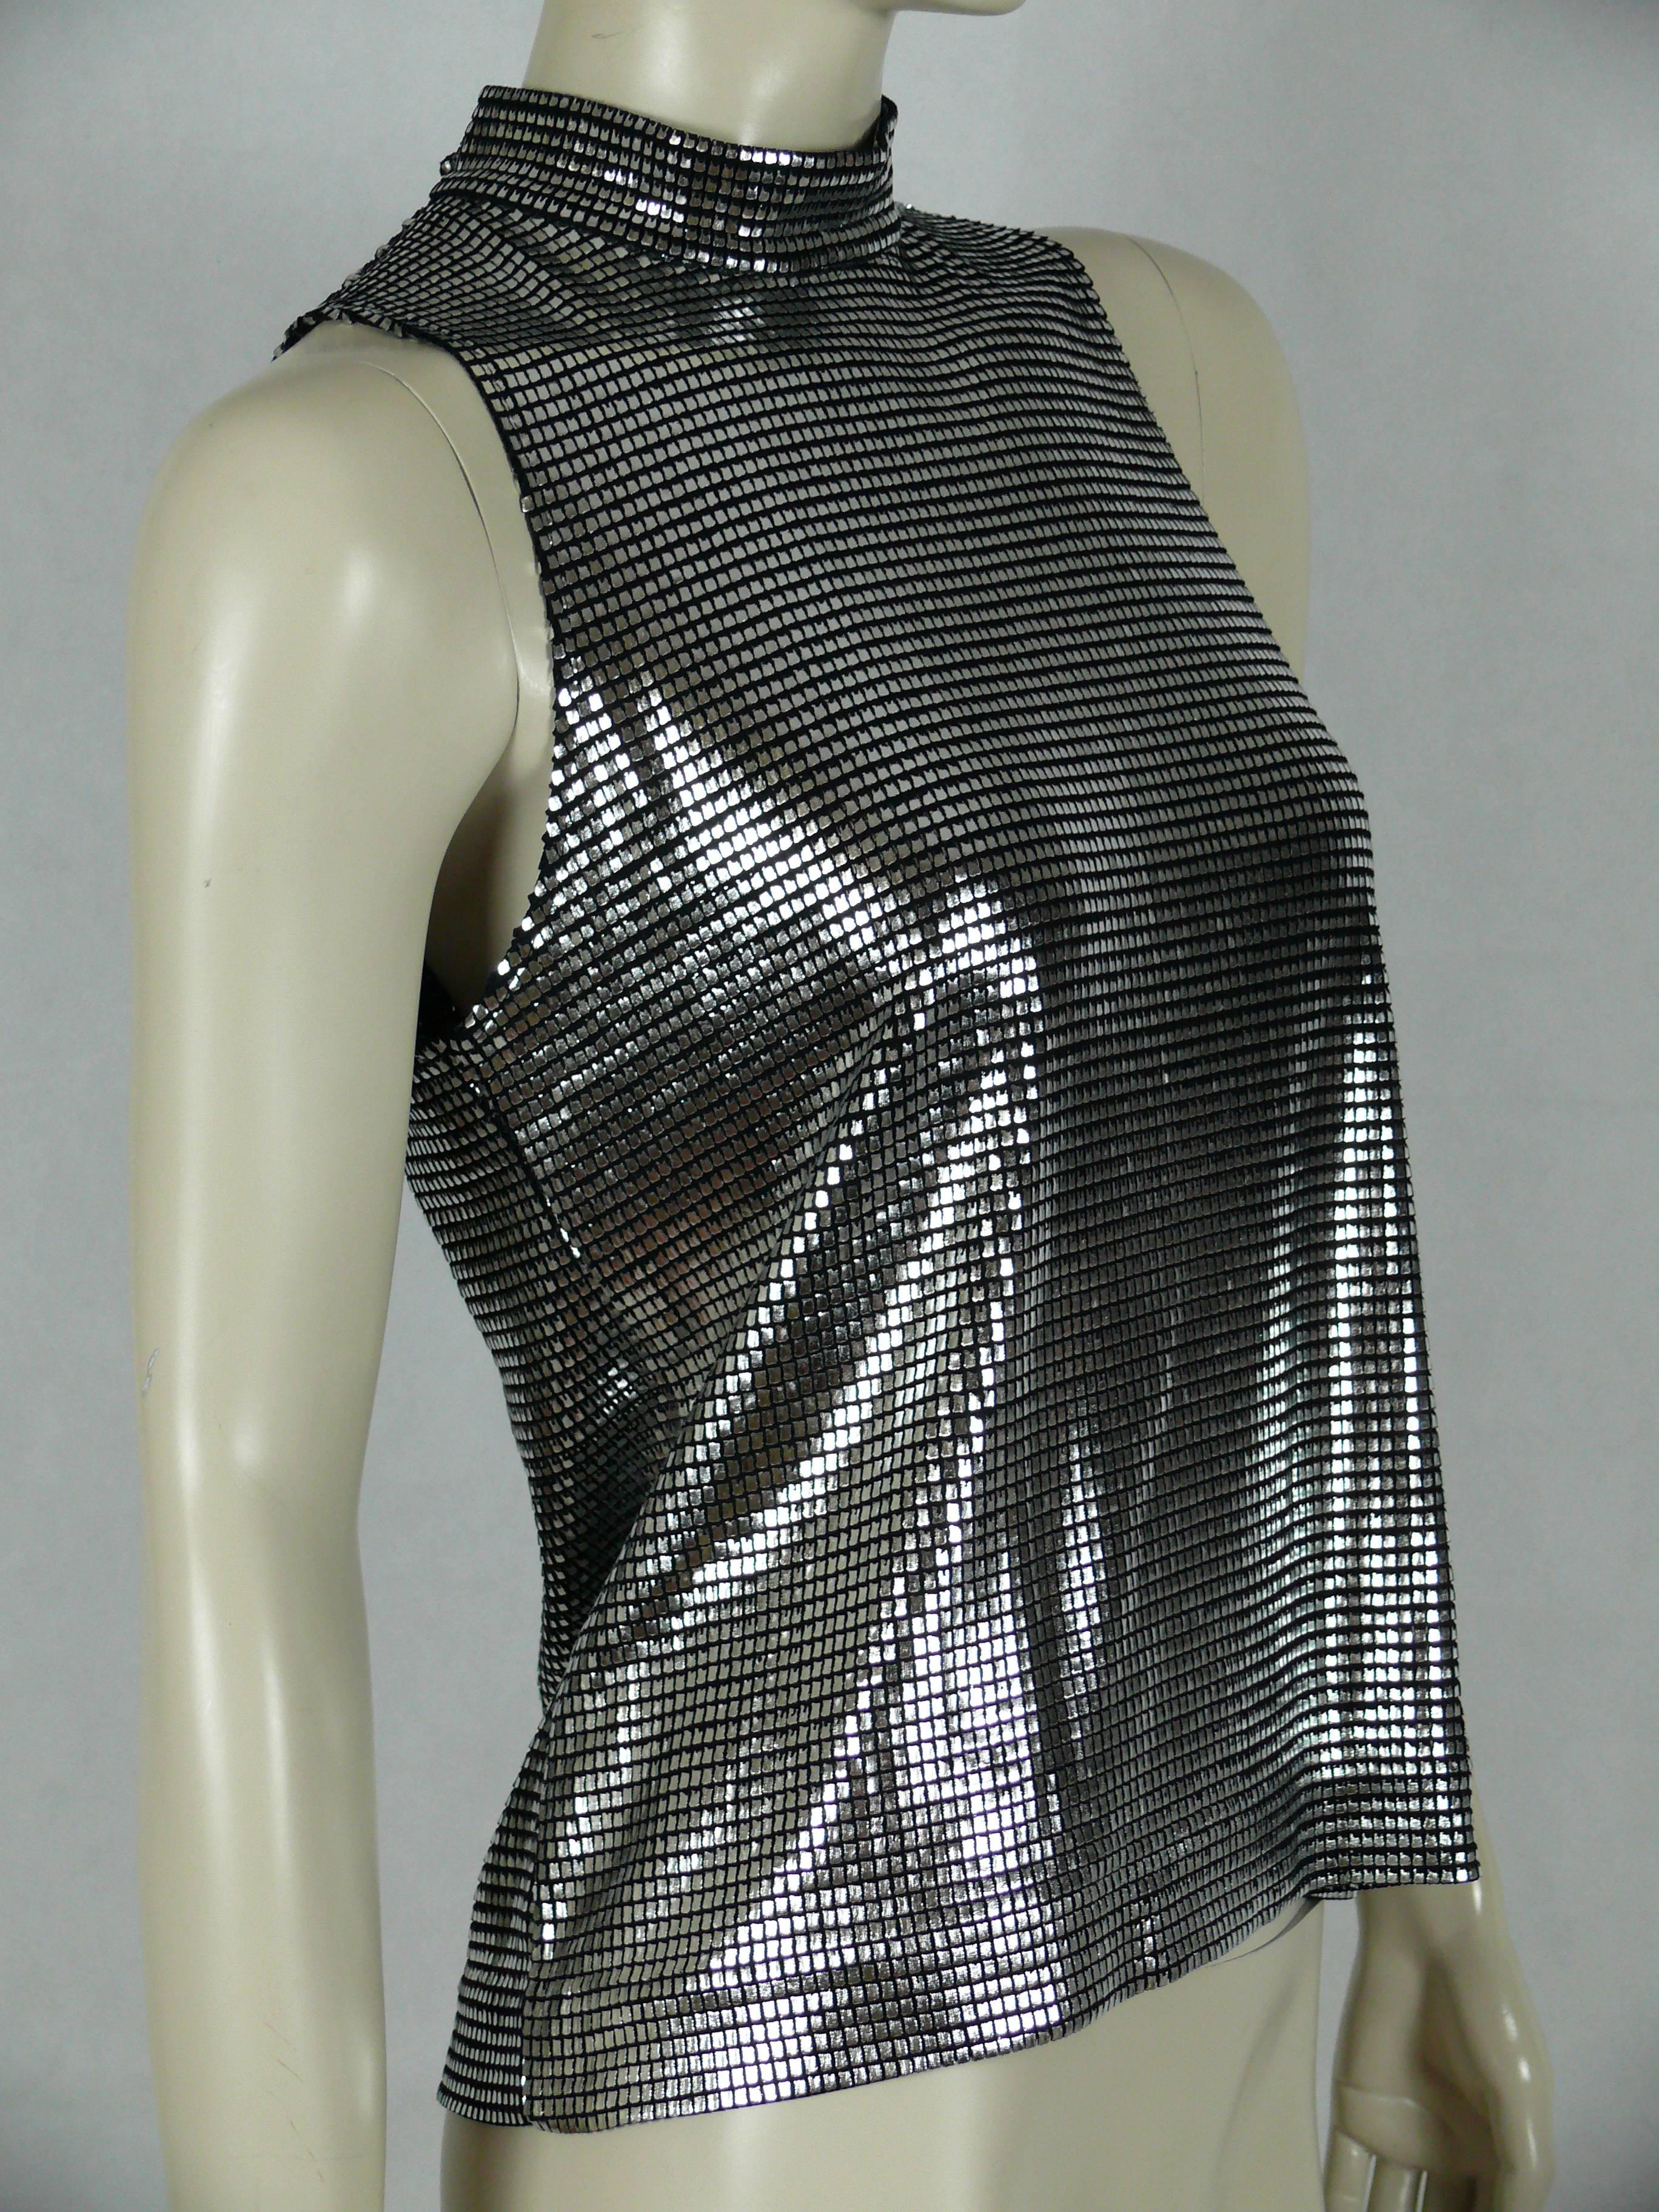 PACO RABANNE silver foil grid sleeveless top.

Top surface is silver foil printed creating a metallic chain mail effect on a black knit spandex base.

Buttoning at the back.

Label reads PACO RABANNE Paris.
Made in France.

Size tag reads :